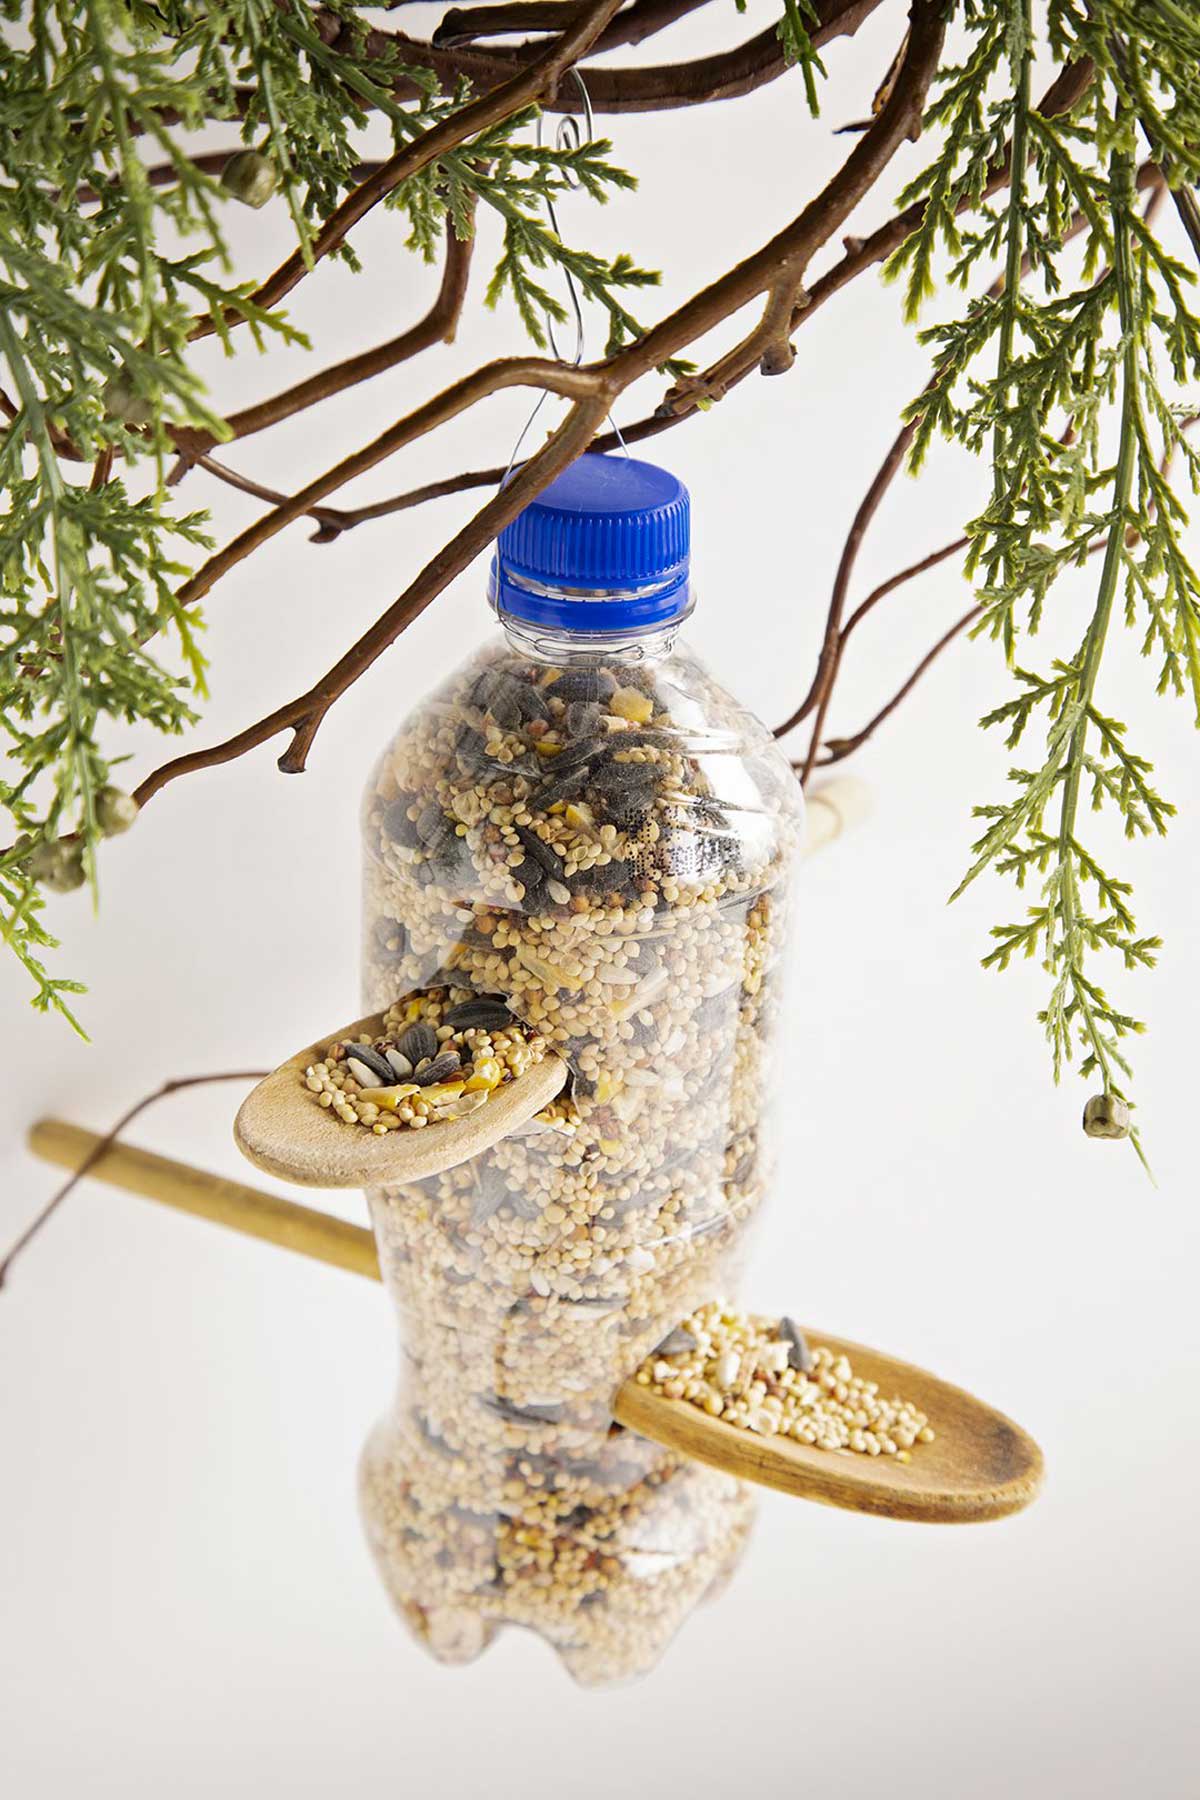 Recycled plastic bottle bird feeder filled with bird seed hanging from branches.